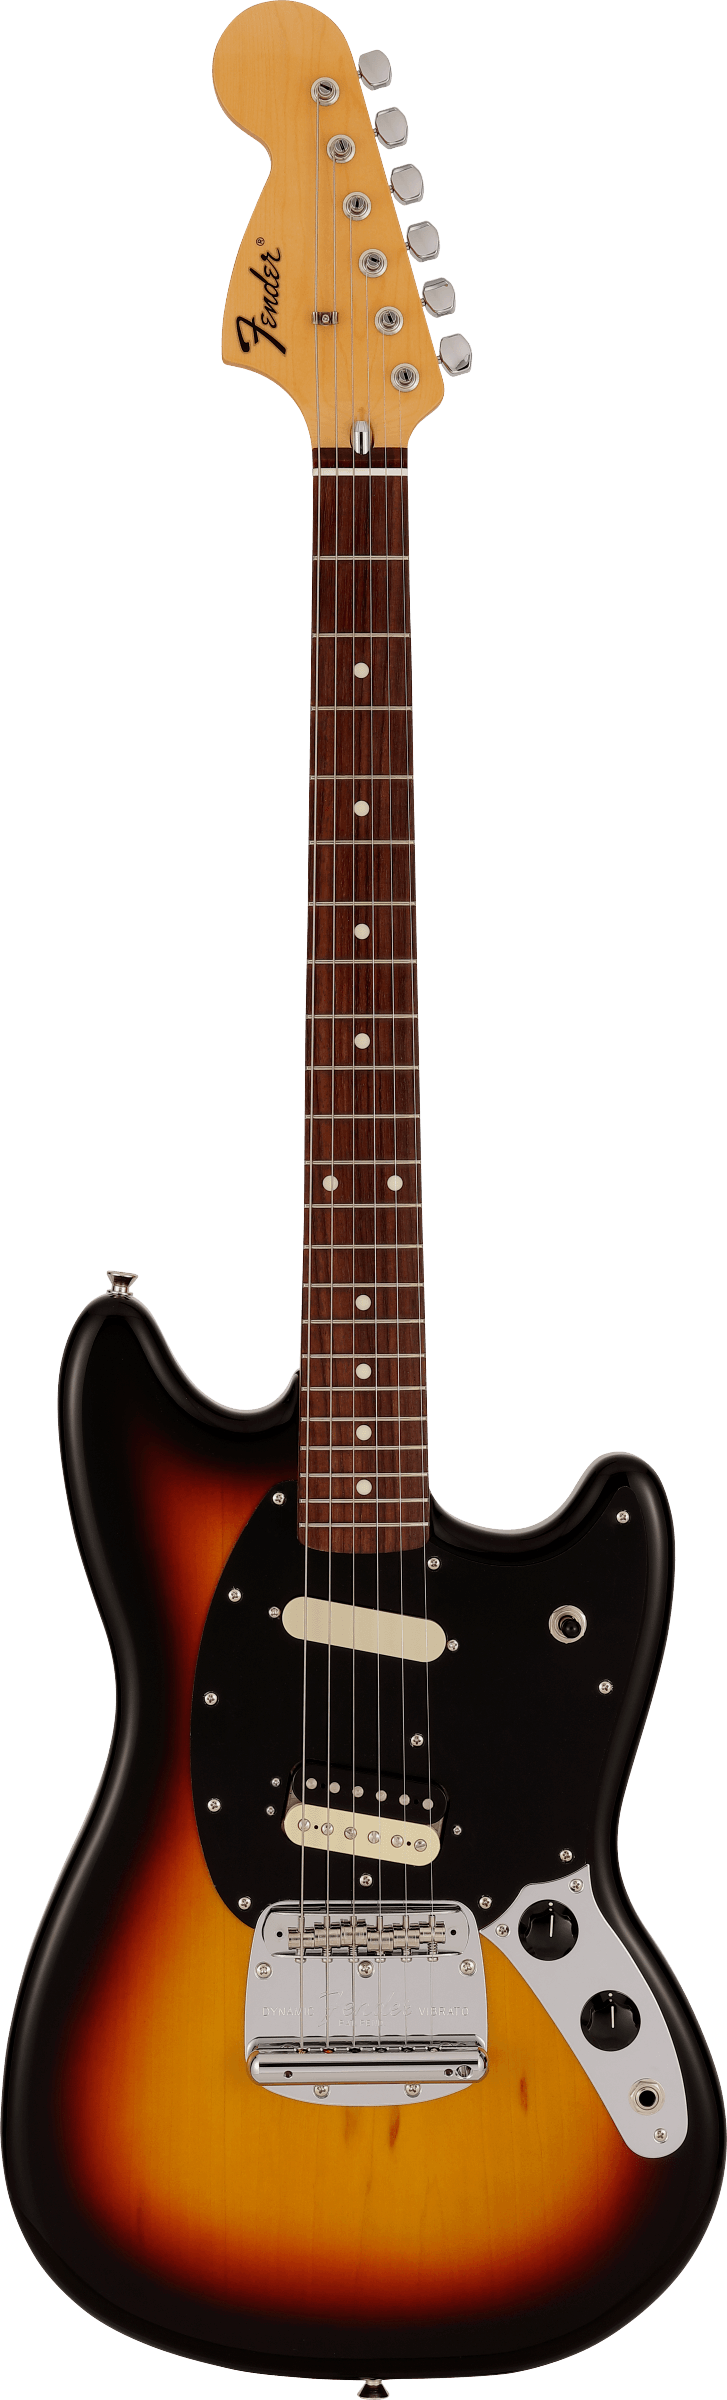 Fender MIJ Limited Edition Traditional Mustang Reverse Headstock ...